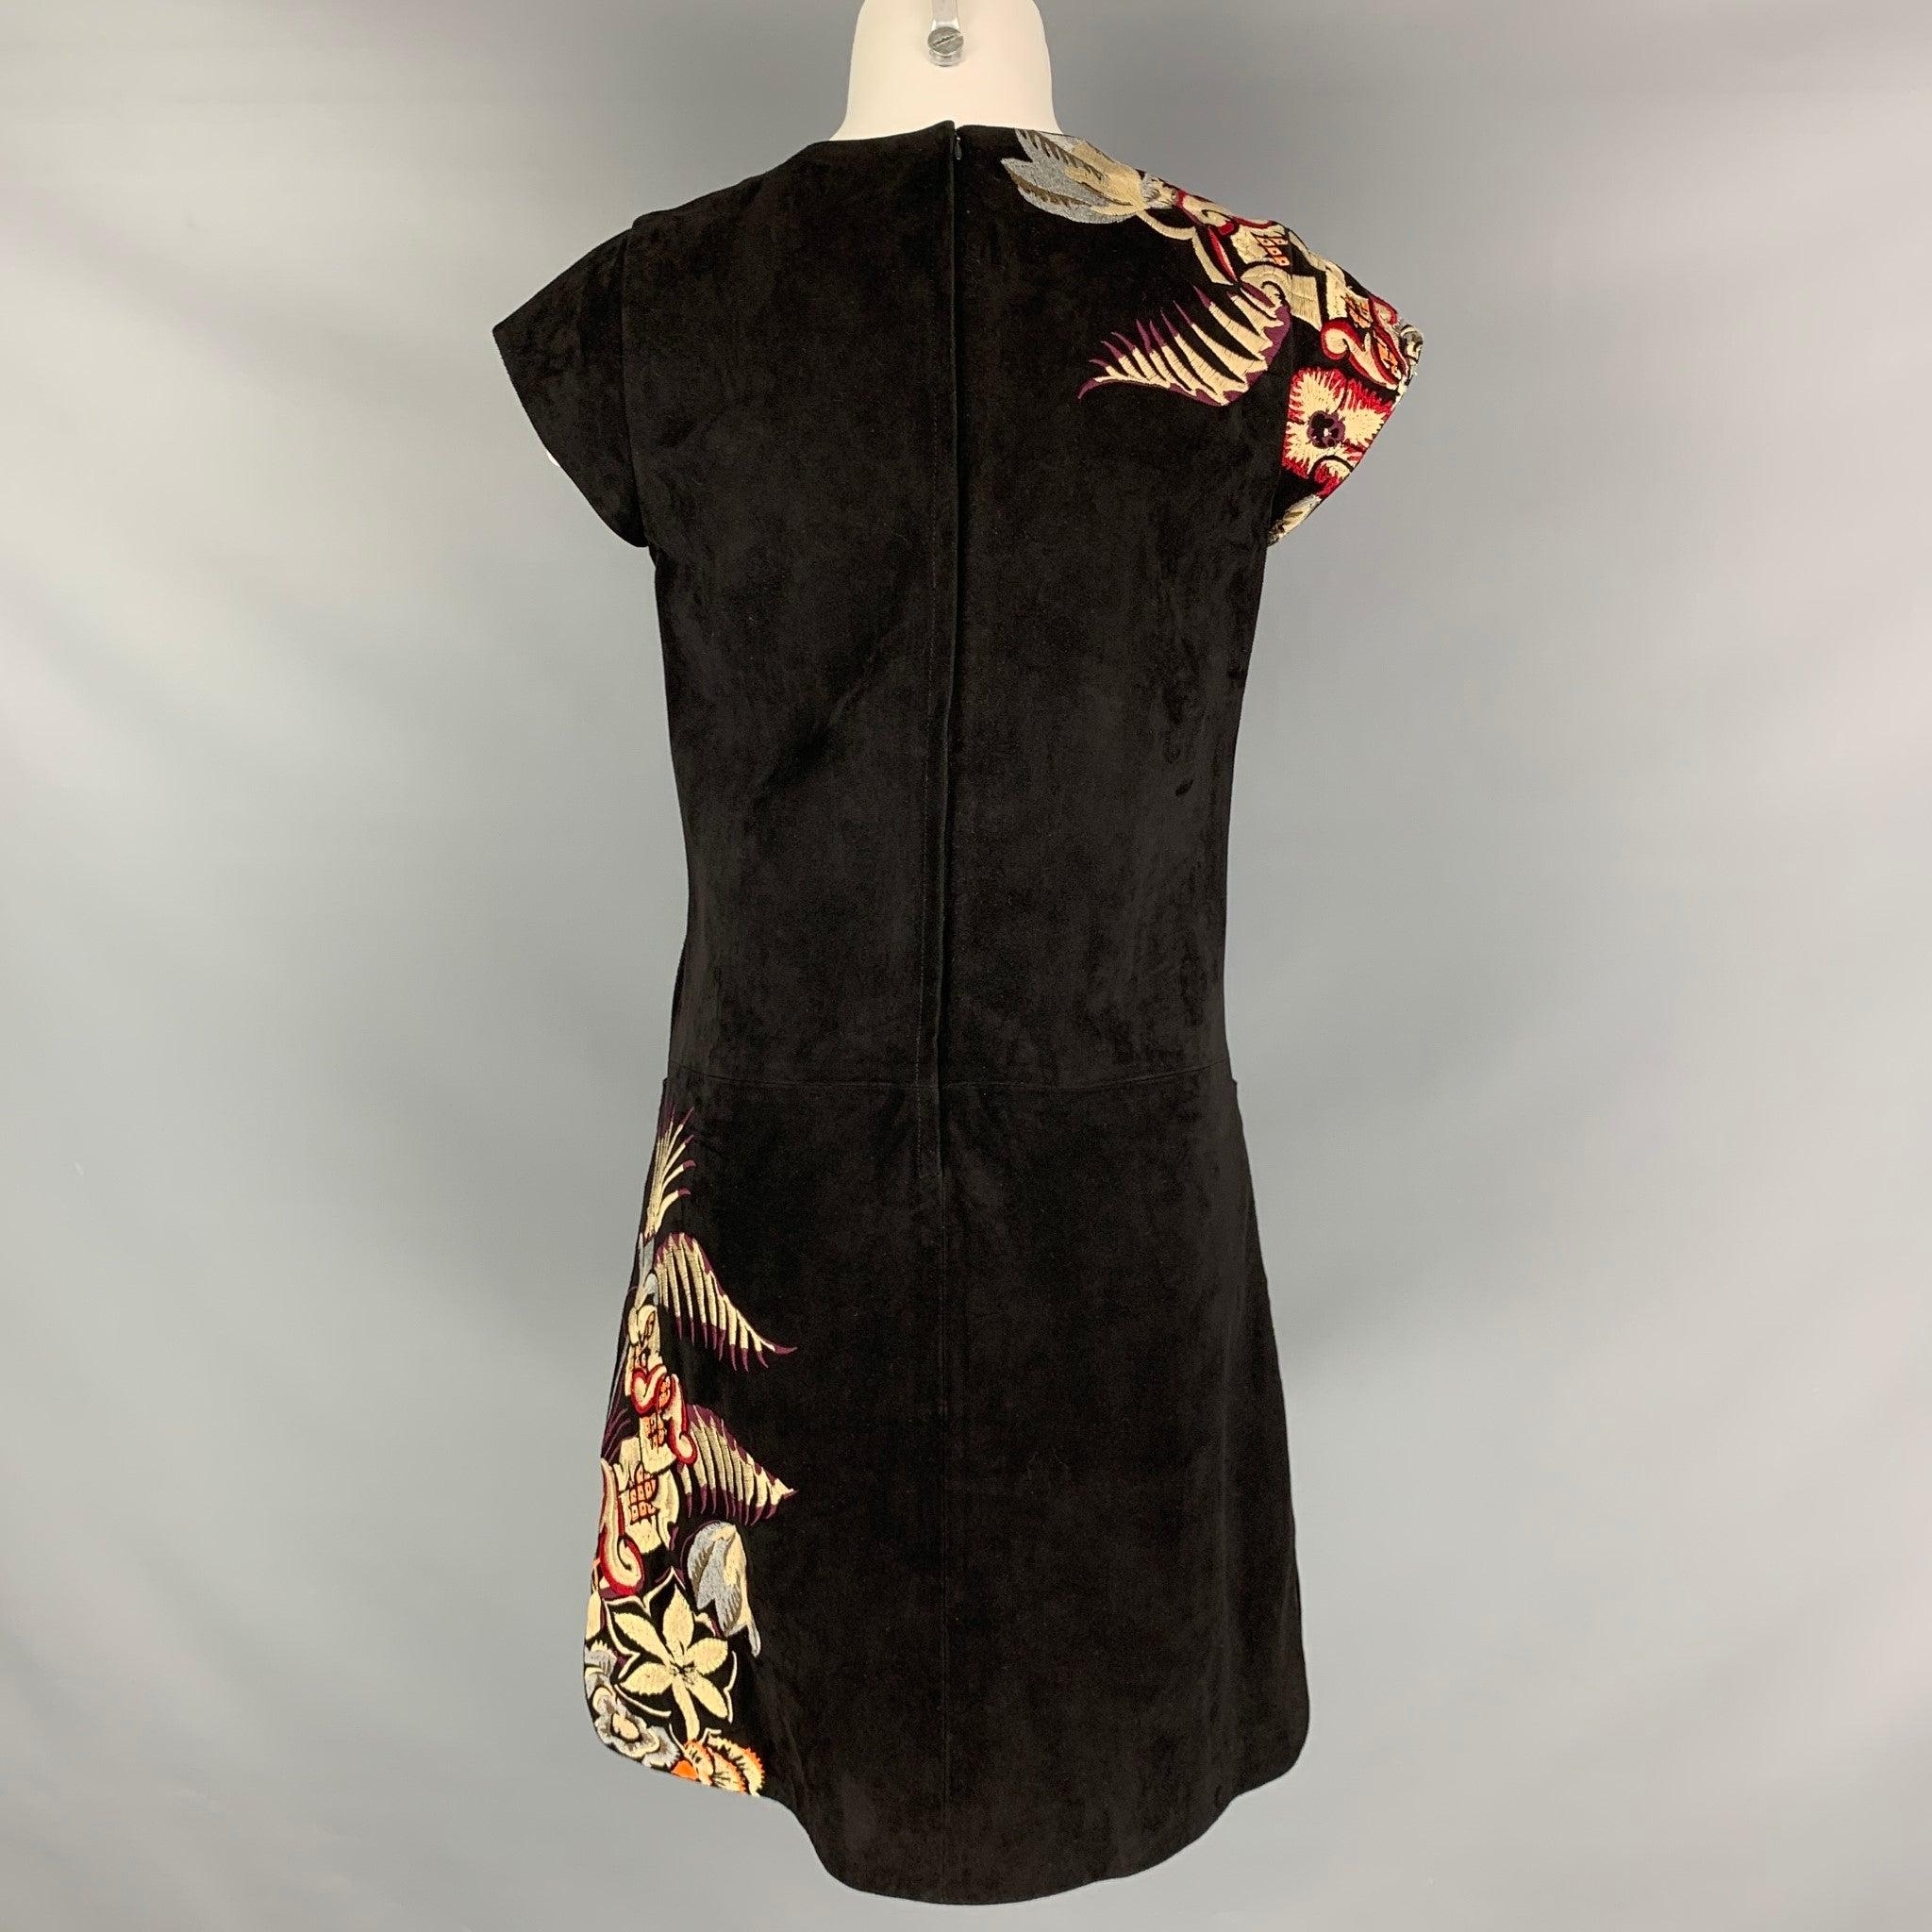 ETRO Size 4 Black Multi-Color Suede Embroidered Goat Skin Short Sleeve Dress In Good Condition For Sale In San Francisco, CA